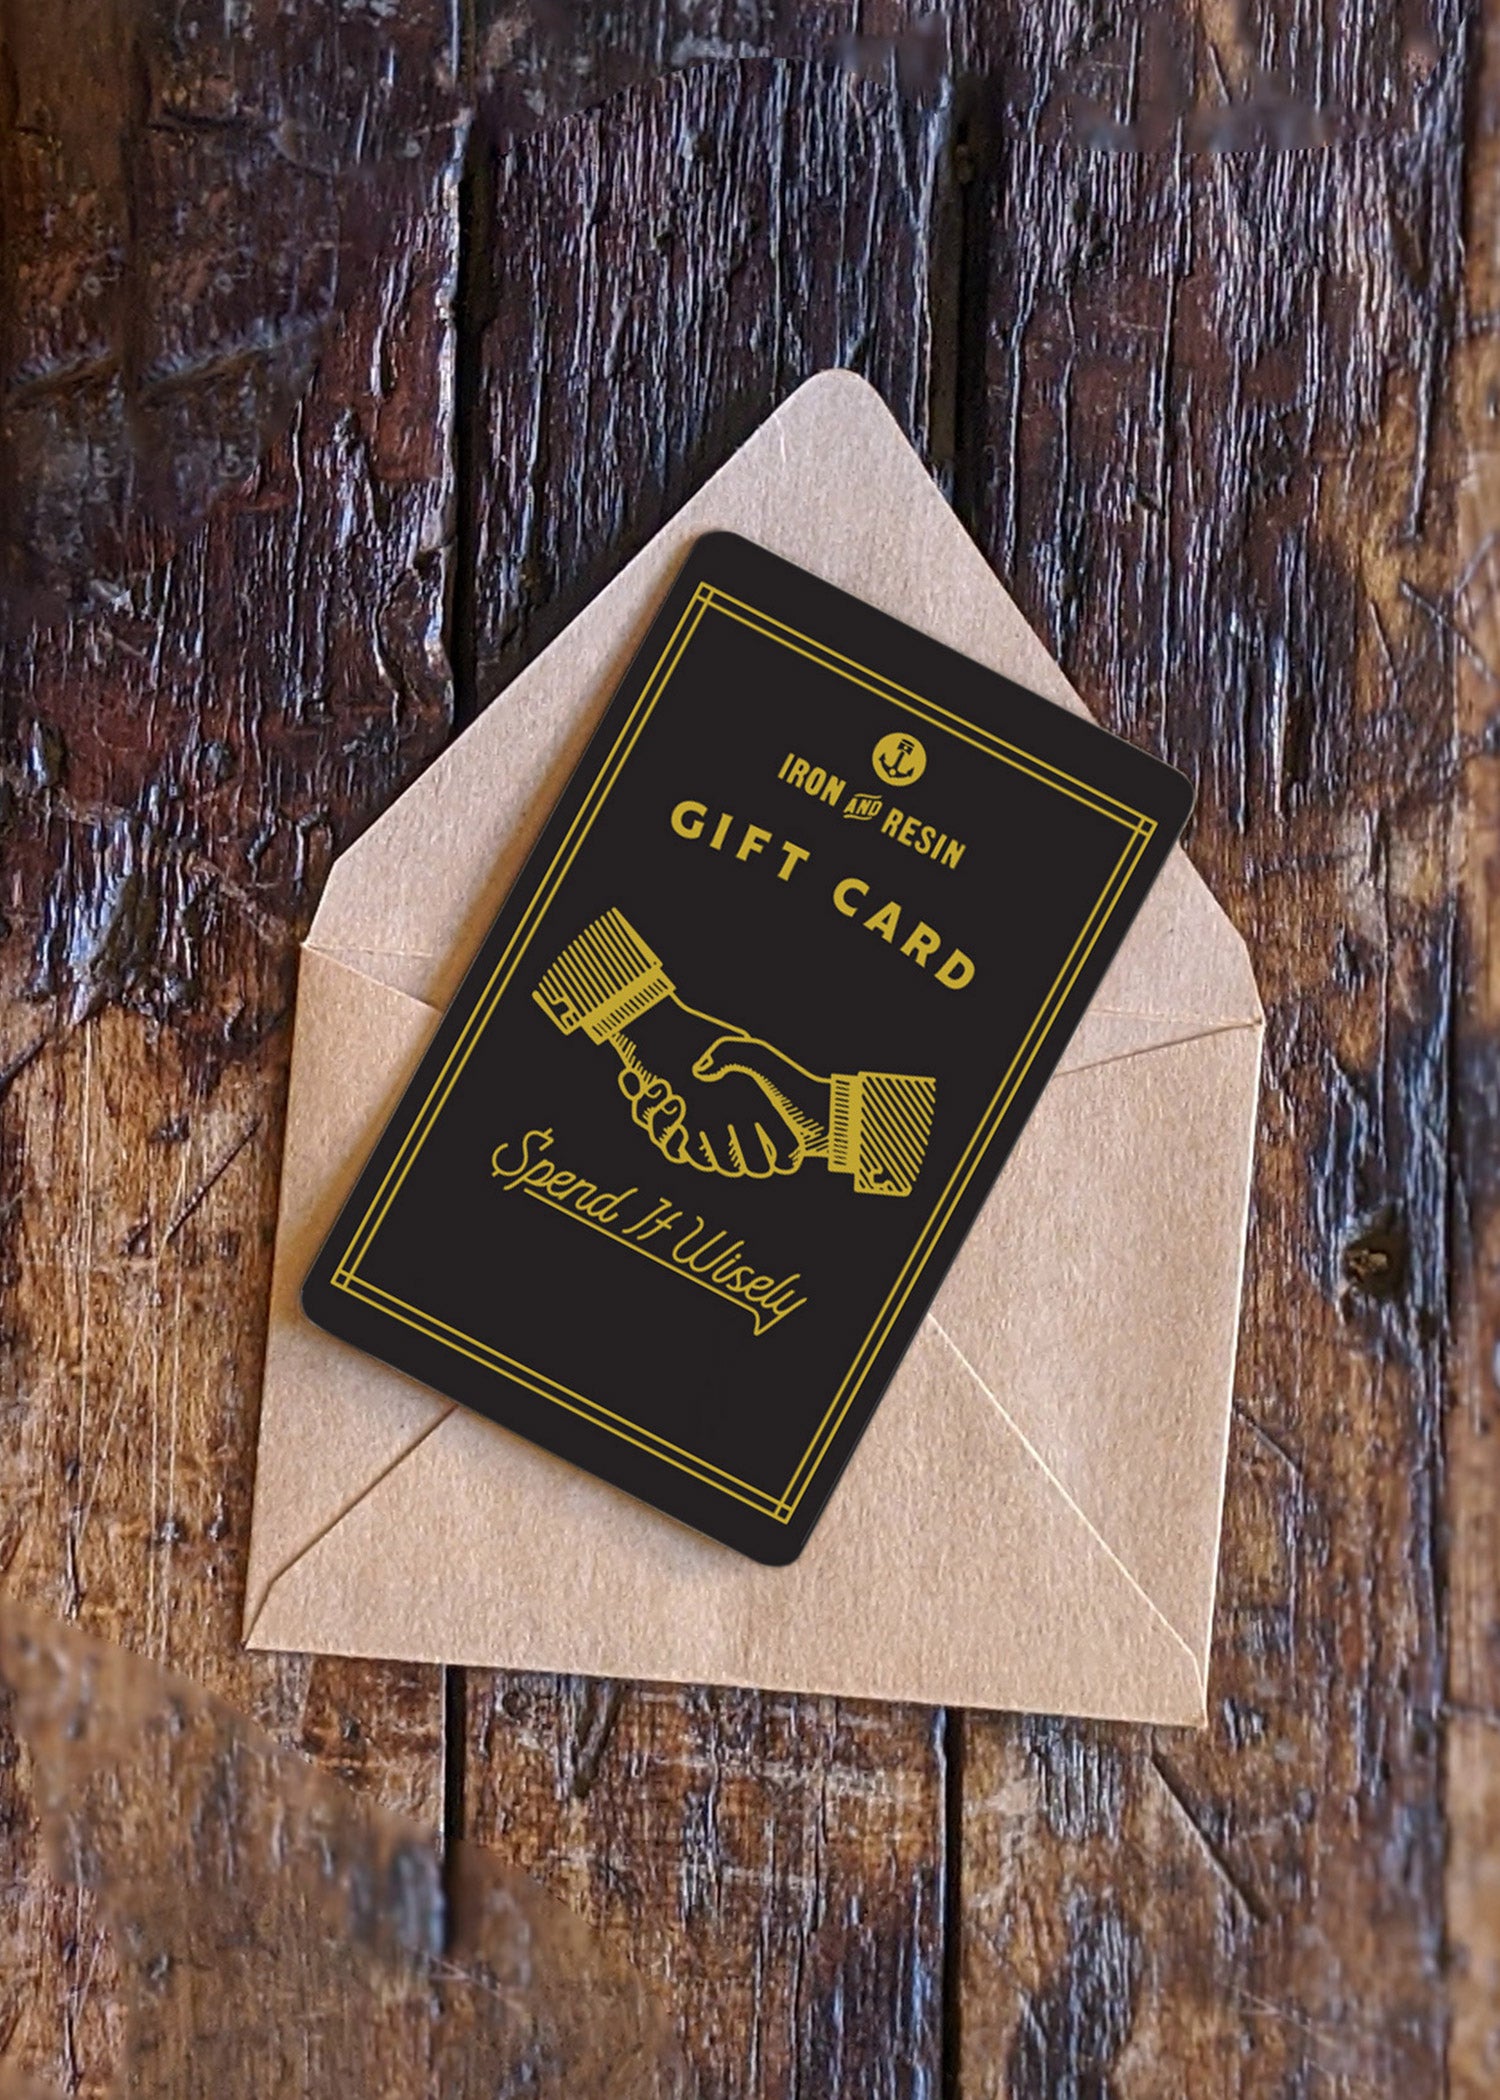 Aged & Ore Gift Card